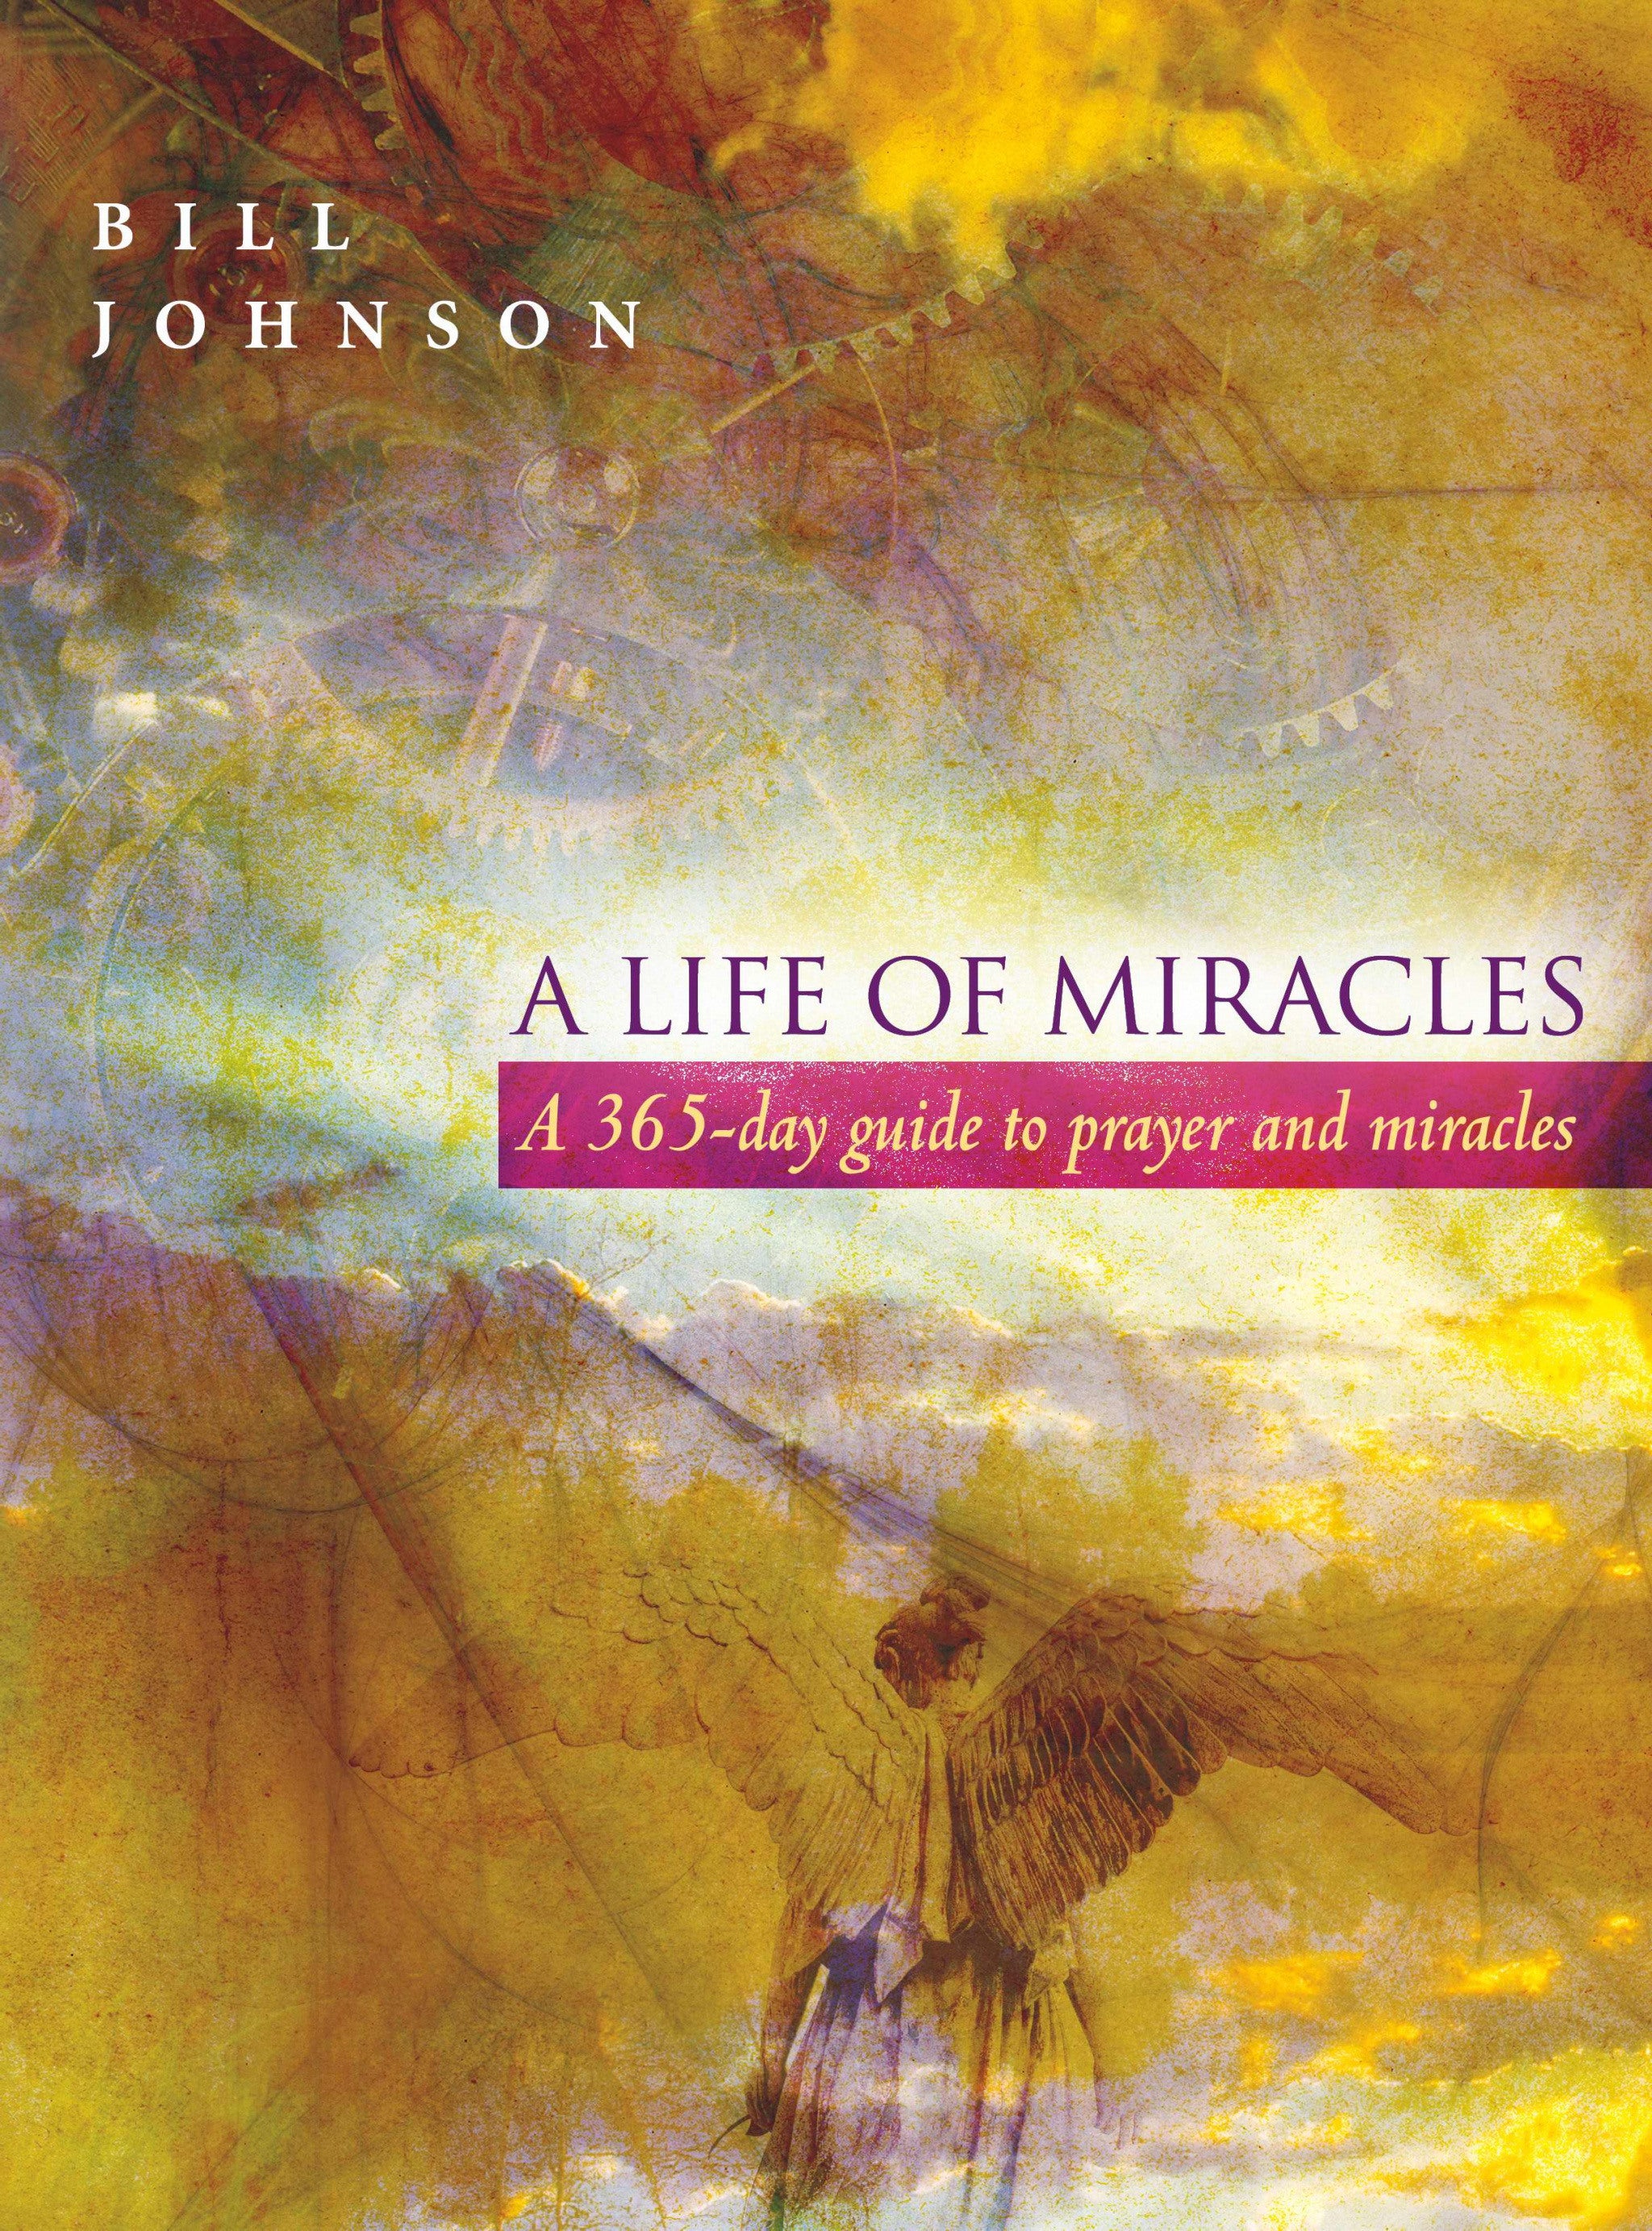 Image of A Life of Miracles other